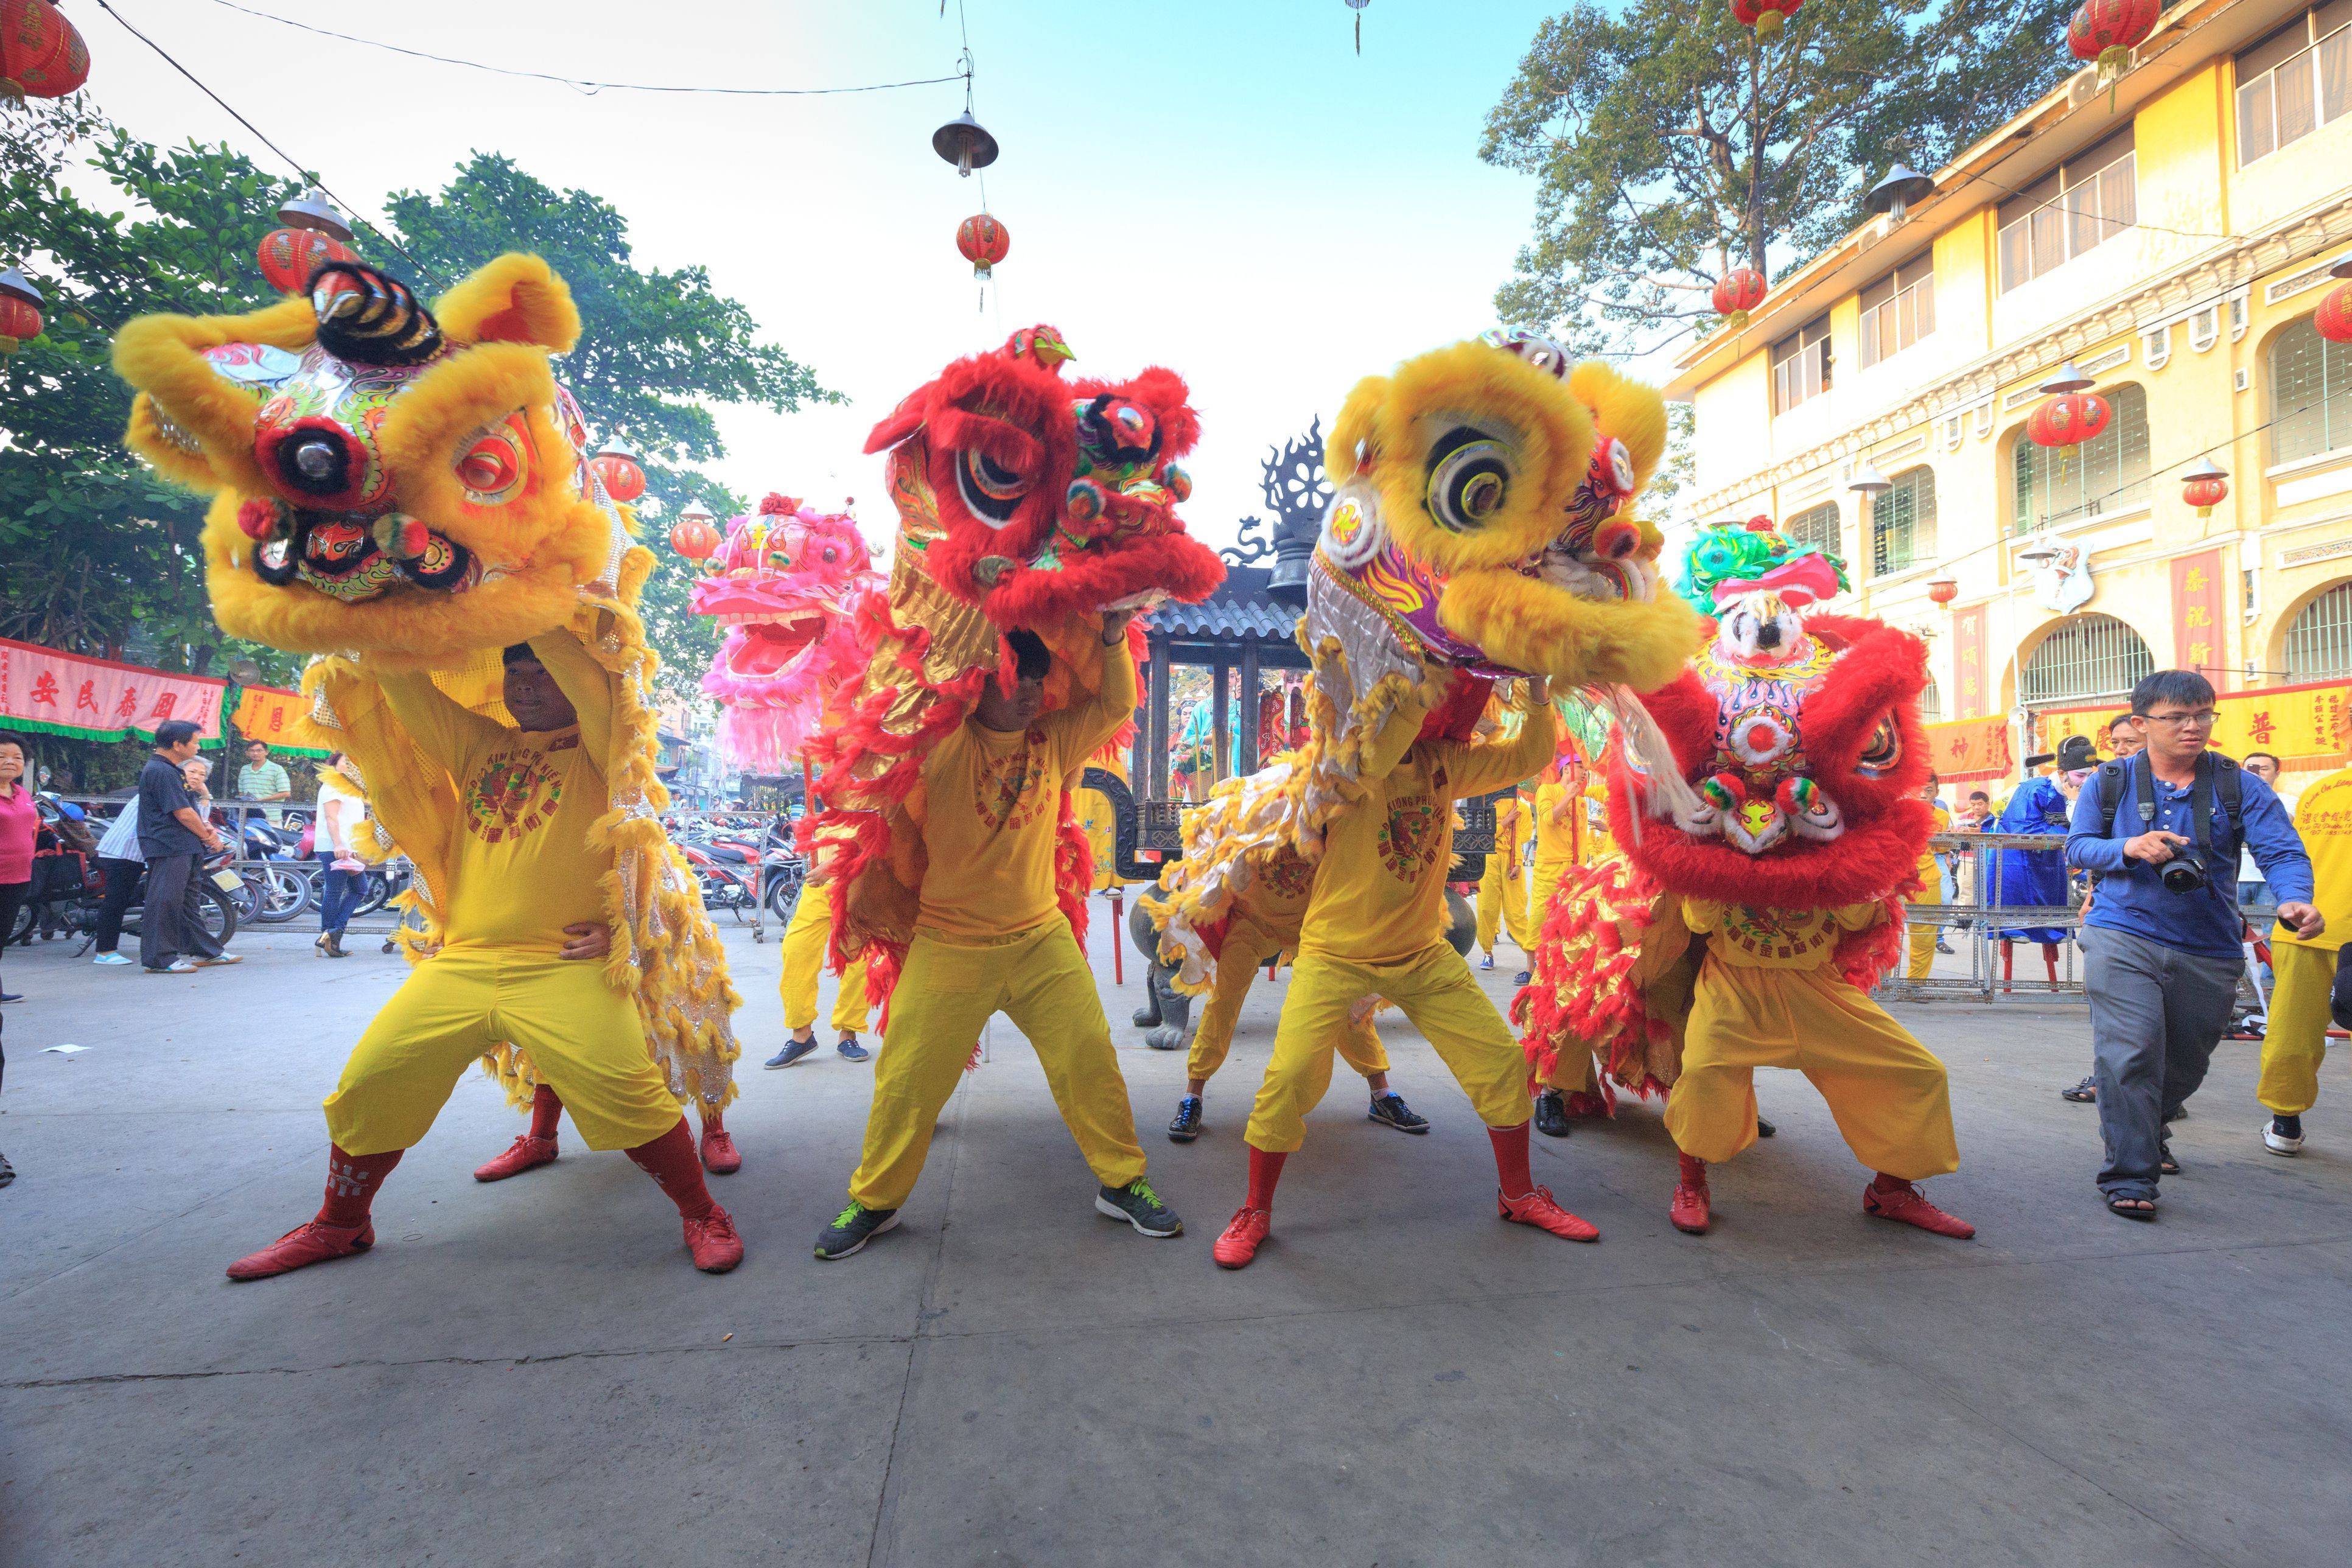 Tet in vietnam: how the vietnamese lunar new year is celebrated